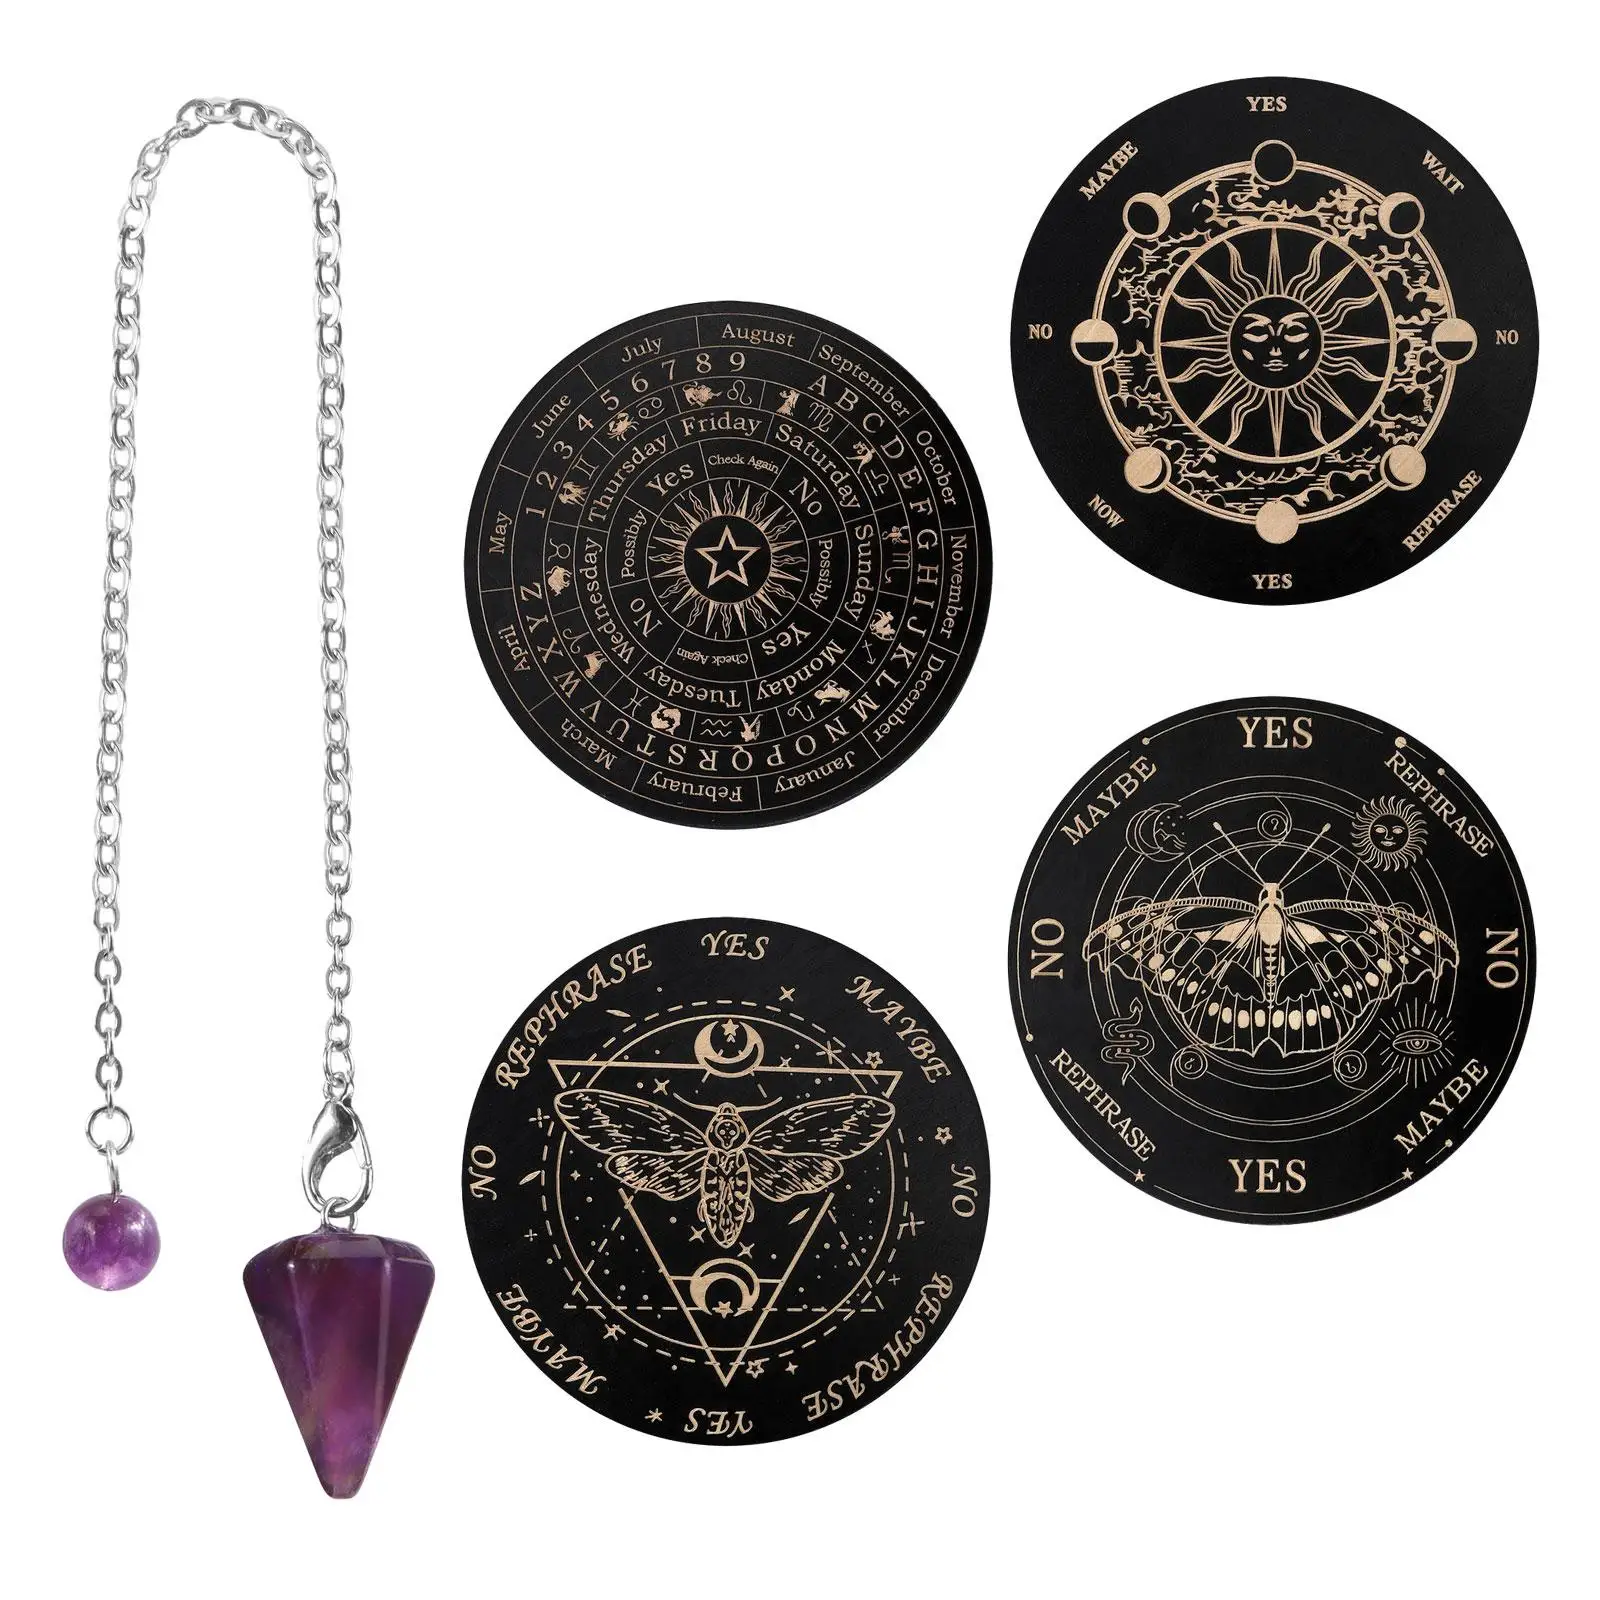 4x Dowsing Divination Board Wooden Home Decor Wiccan Witchcraft with Crystal Necklace Round 5.9